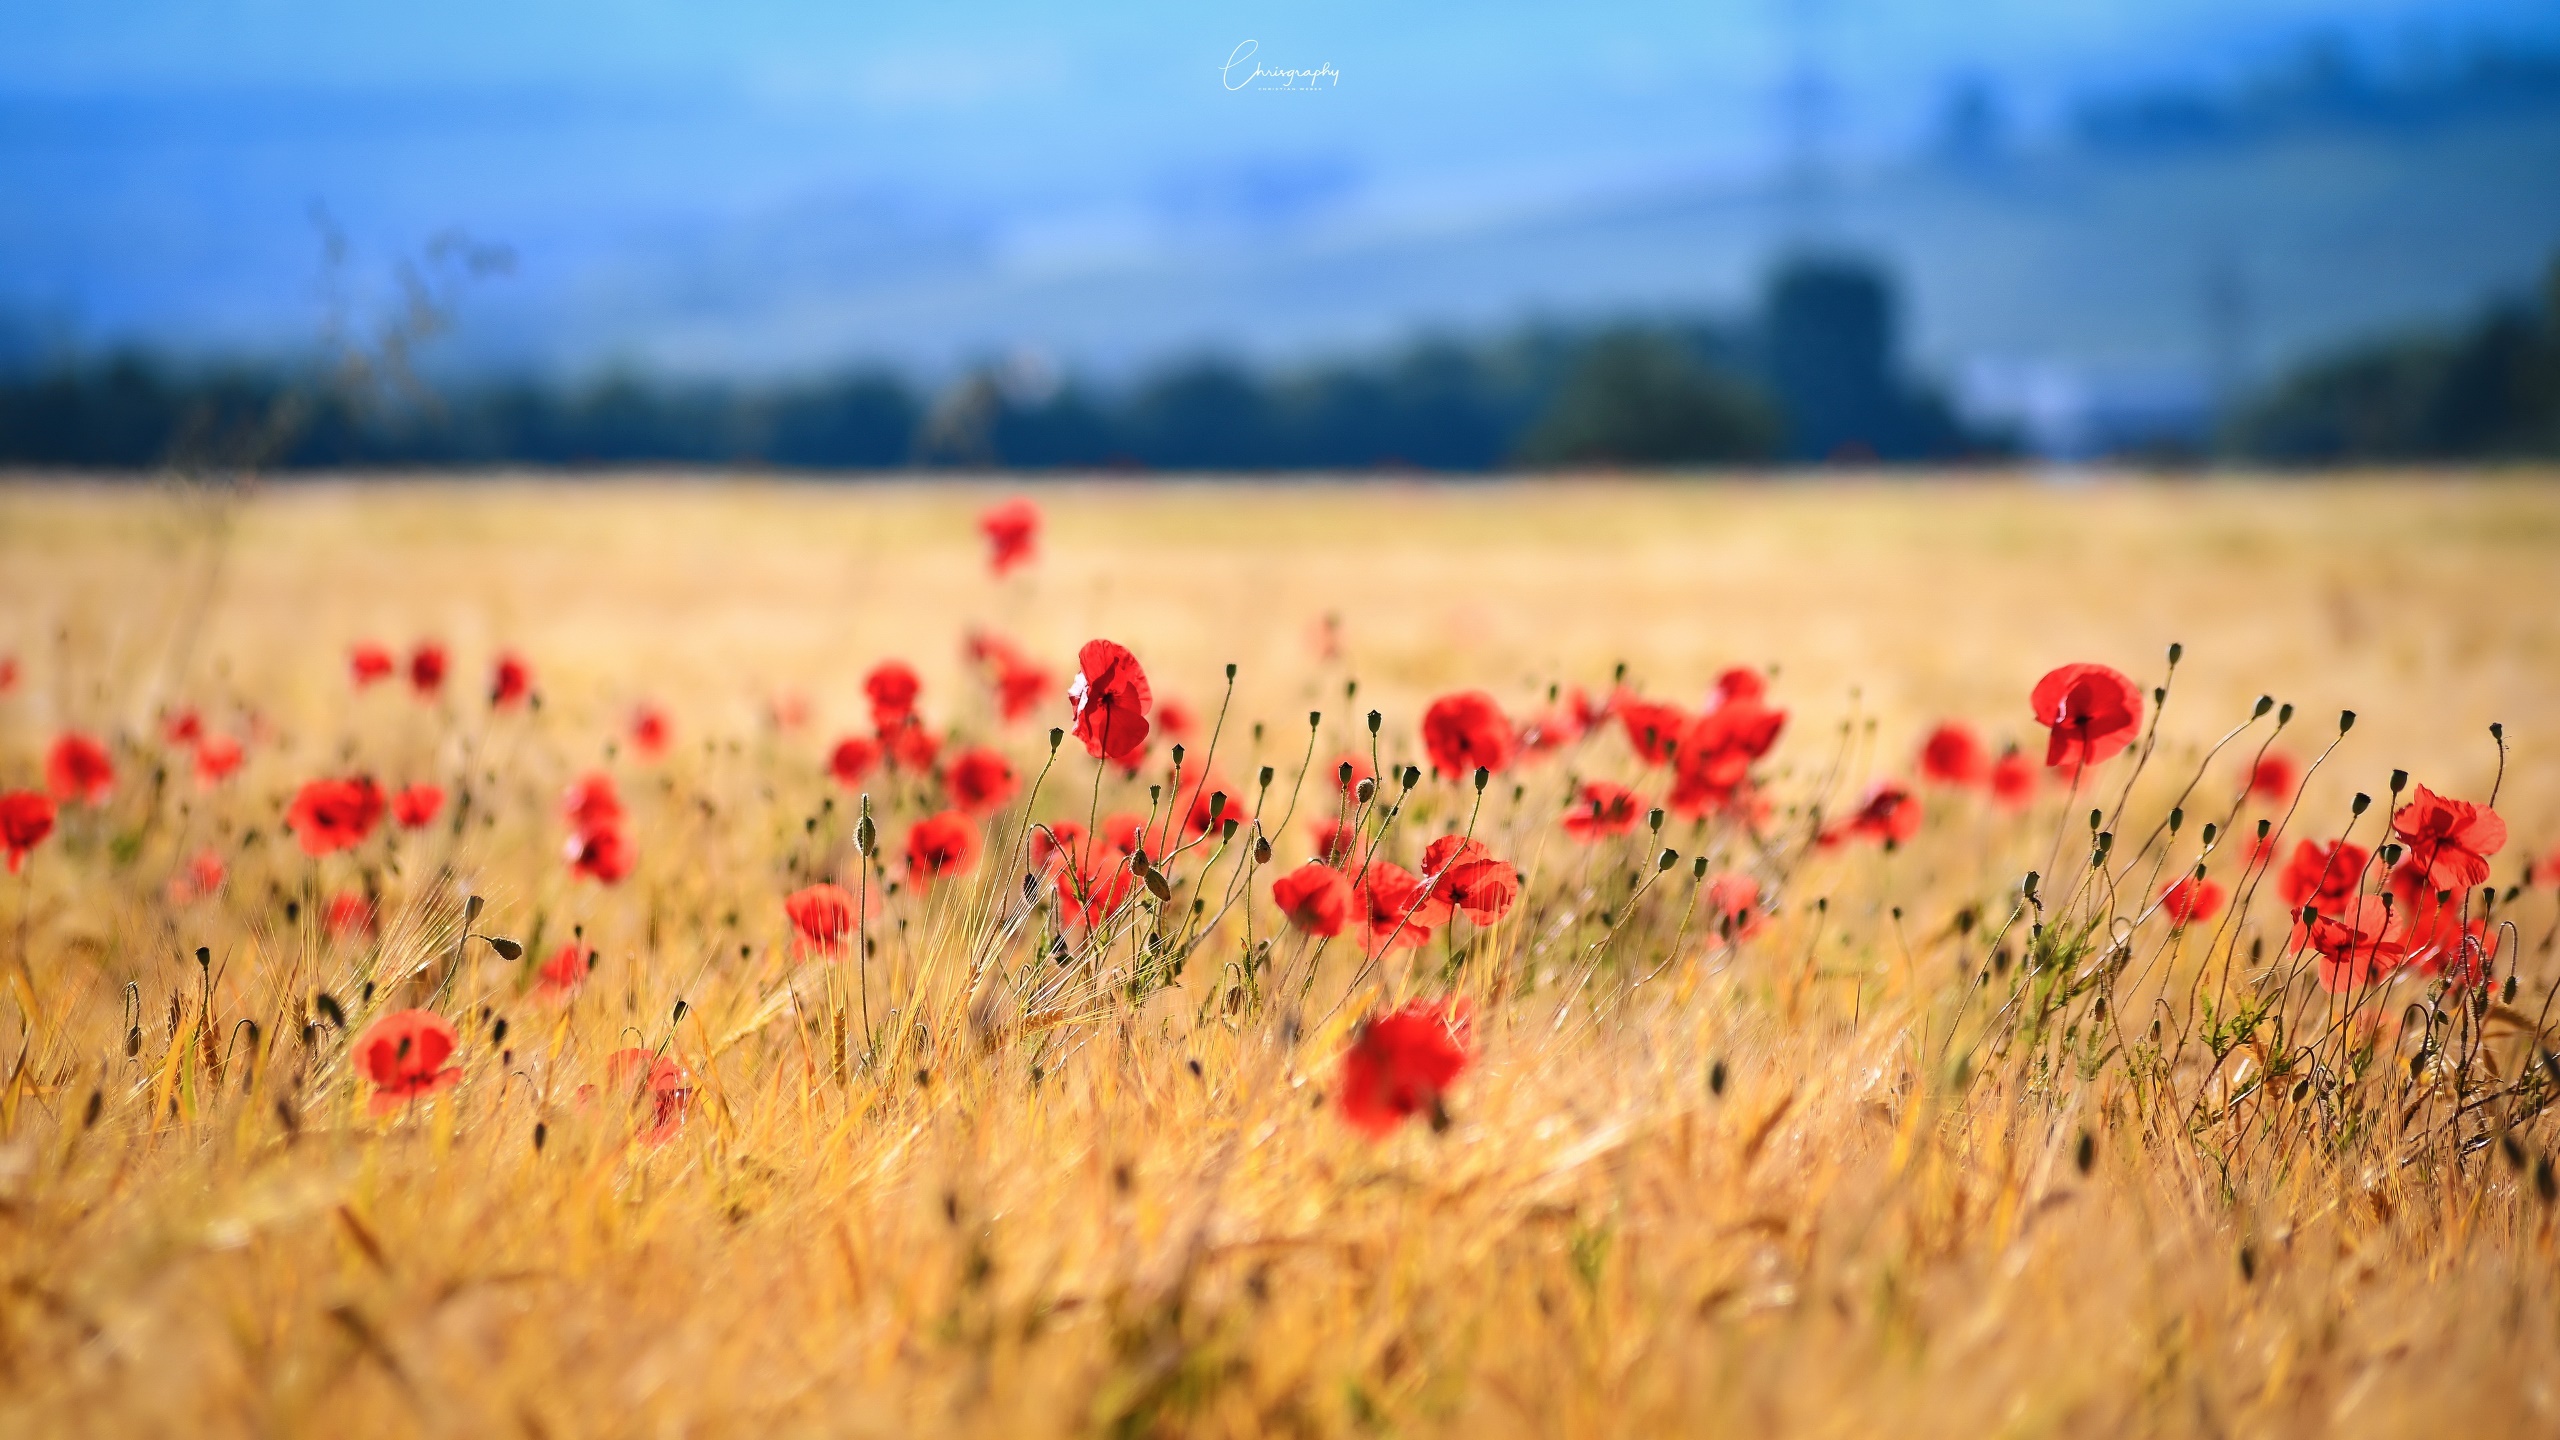 General 2560x1440 colorful flowers field outdoors plants red flowers Chrisgraphy poppies